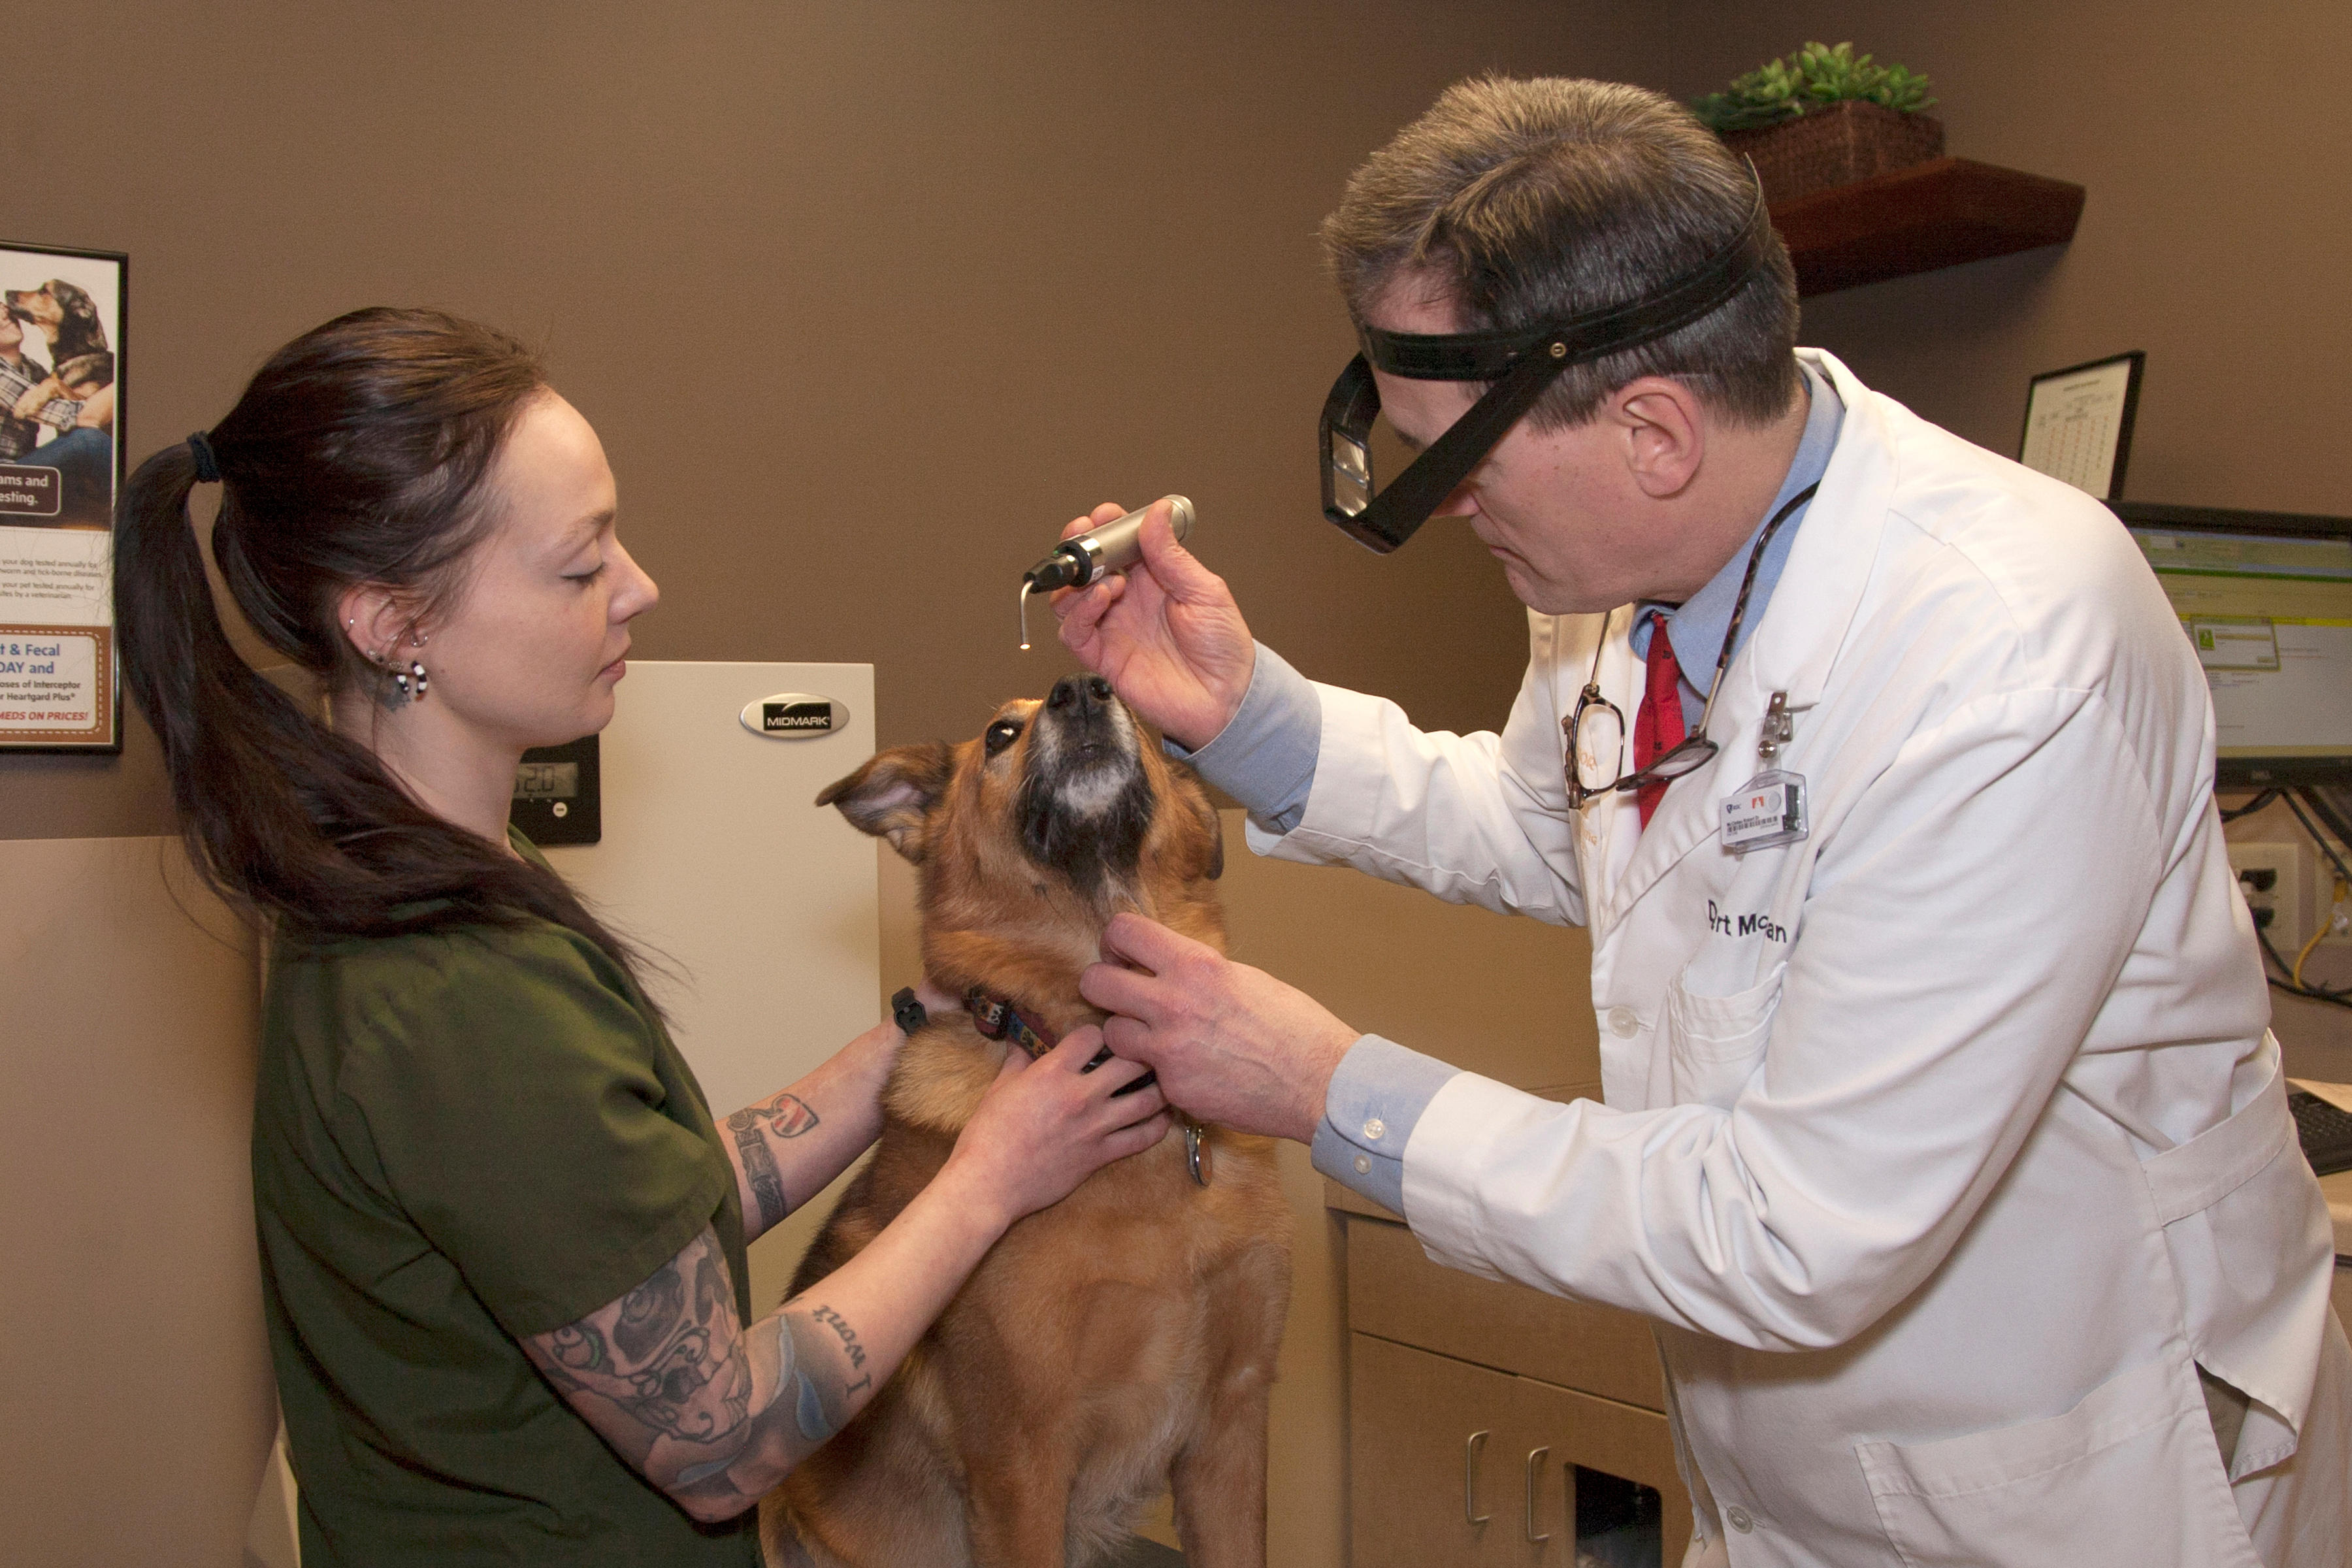 An assessment of the eyes is just one small part of a comprehensive wellness exam at Superior Animal Hospital. Here, Dr. Robert McClellan checks for unusual coloration, discharge, and other abnormalities.